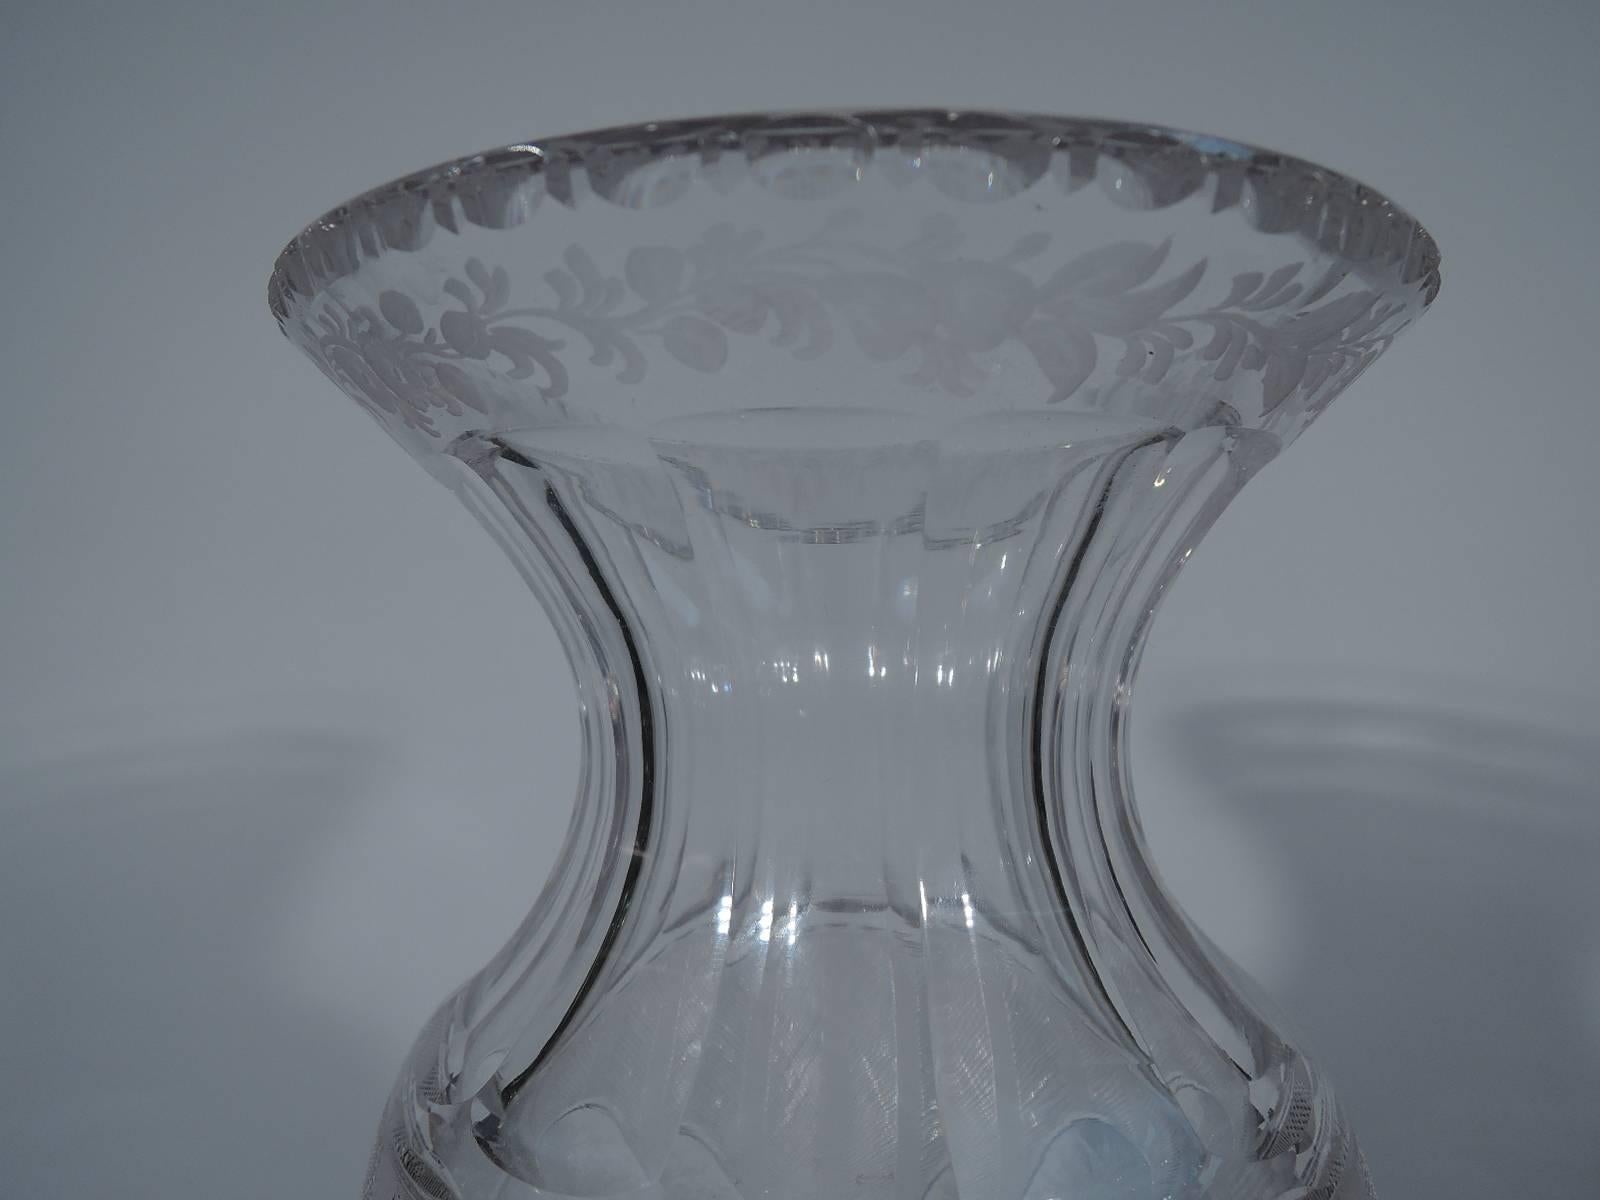 Cut-glass and sterling silver vase. Made by Hawkes in New York, circa 1910. Baluster body with base knop and concave neck. Alternating stripes and lattice and oval frames acid-etched with flower baskets. Fish scale bottom, faceted knop and lobed